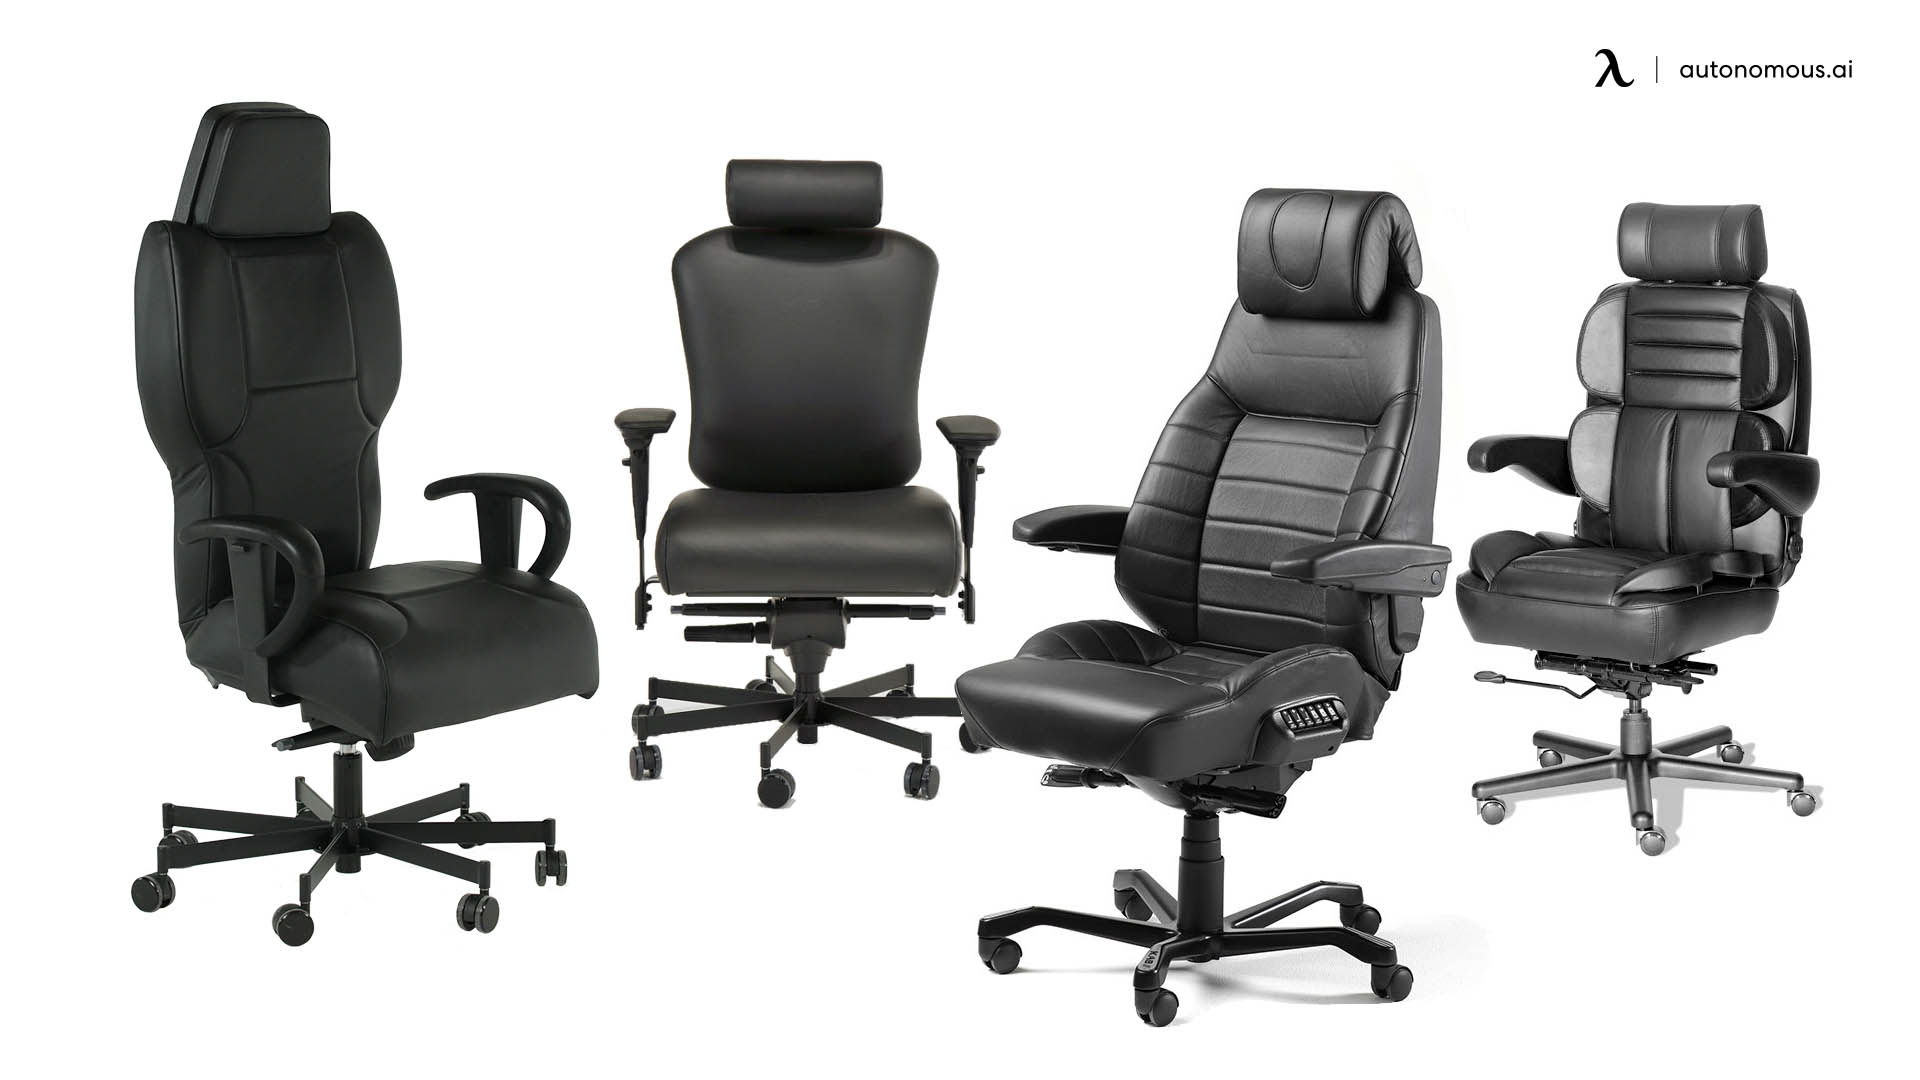 24 Hour Office Chairs: Top 3 Best Heavy Duty Dispatch Chairs